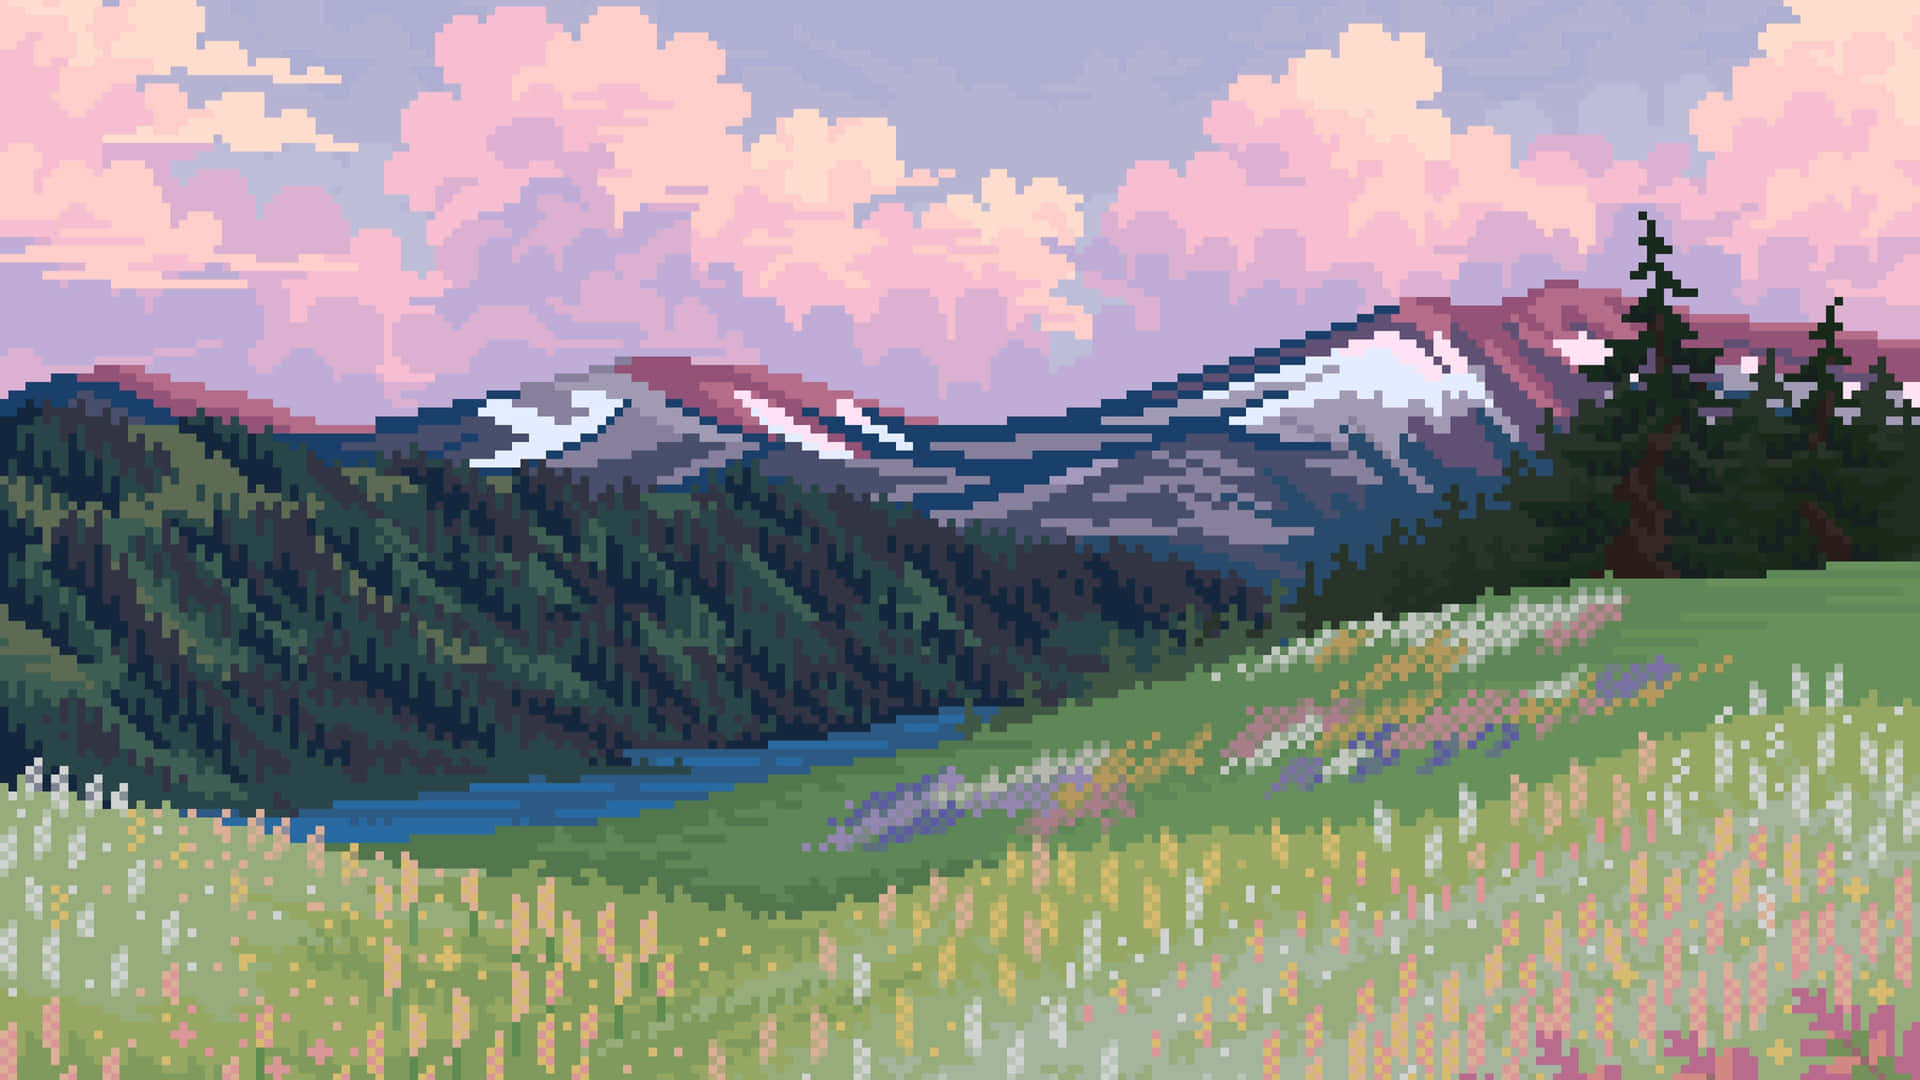 Pixel Art Of A Mountain Landscape With Flowers And Grass